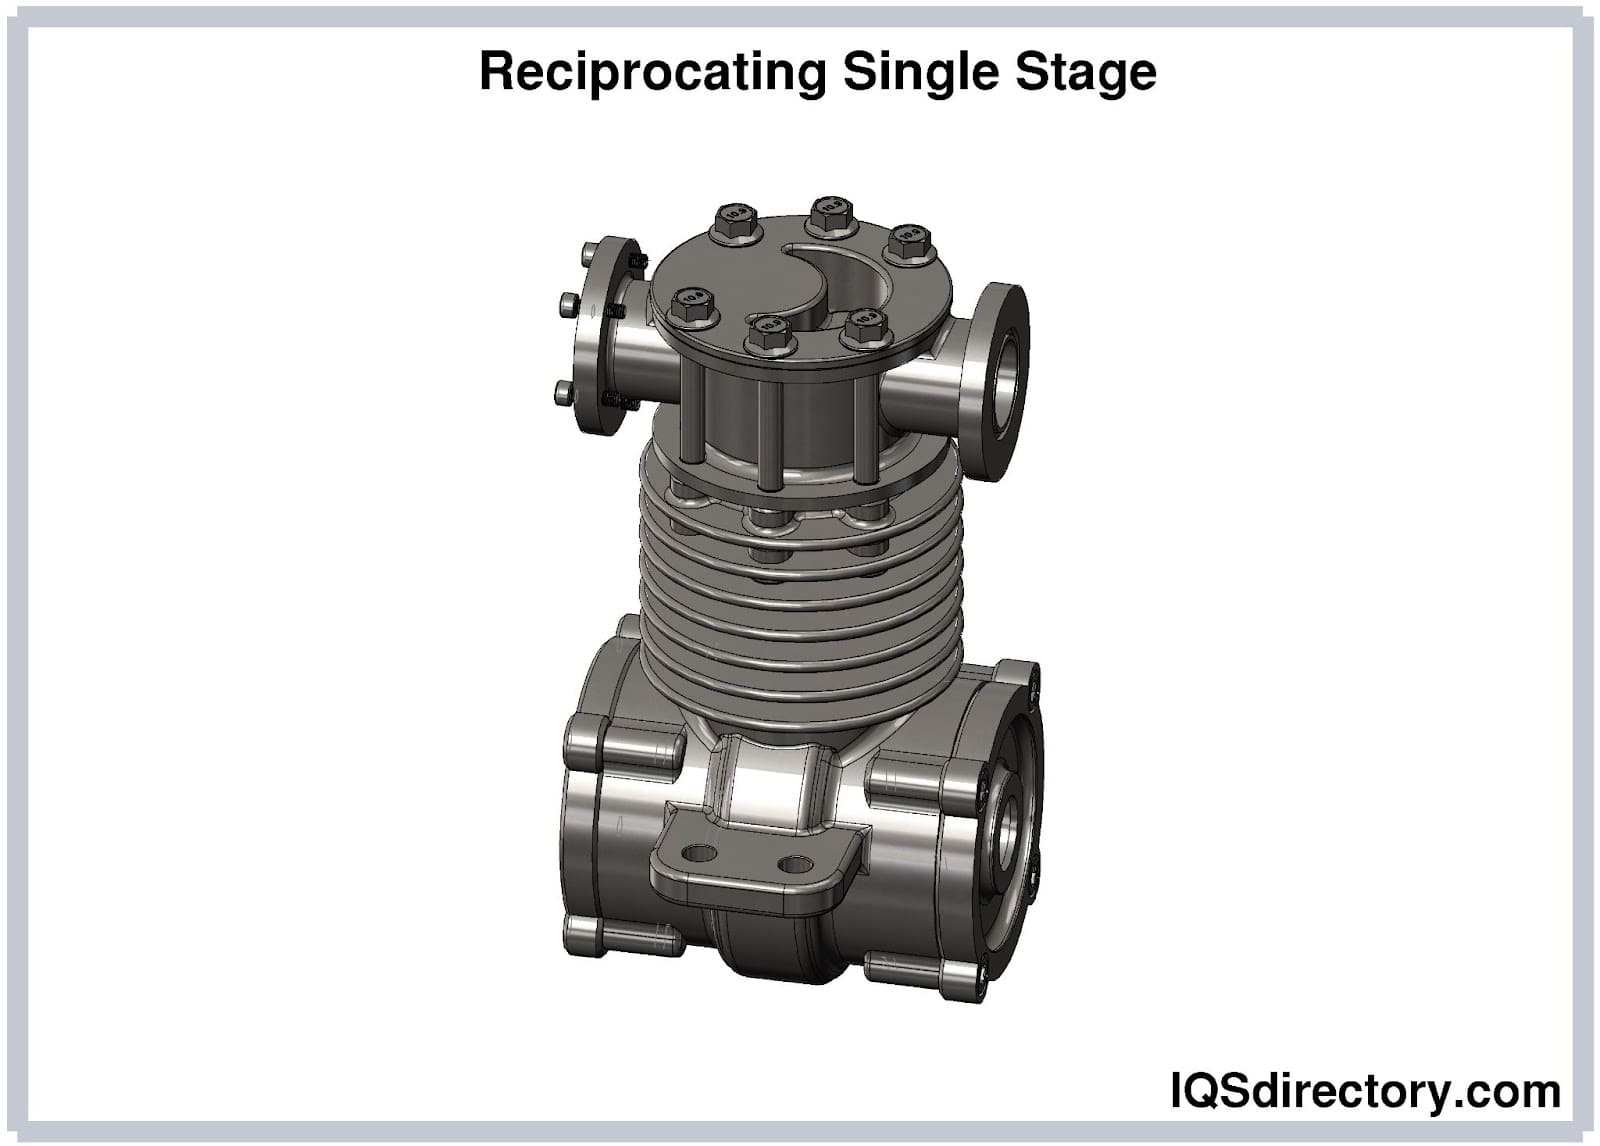 Reciprocating Single Stage